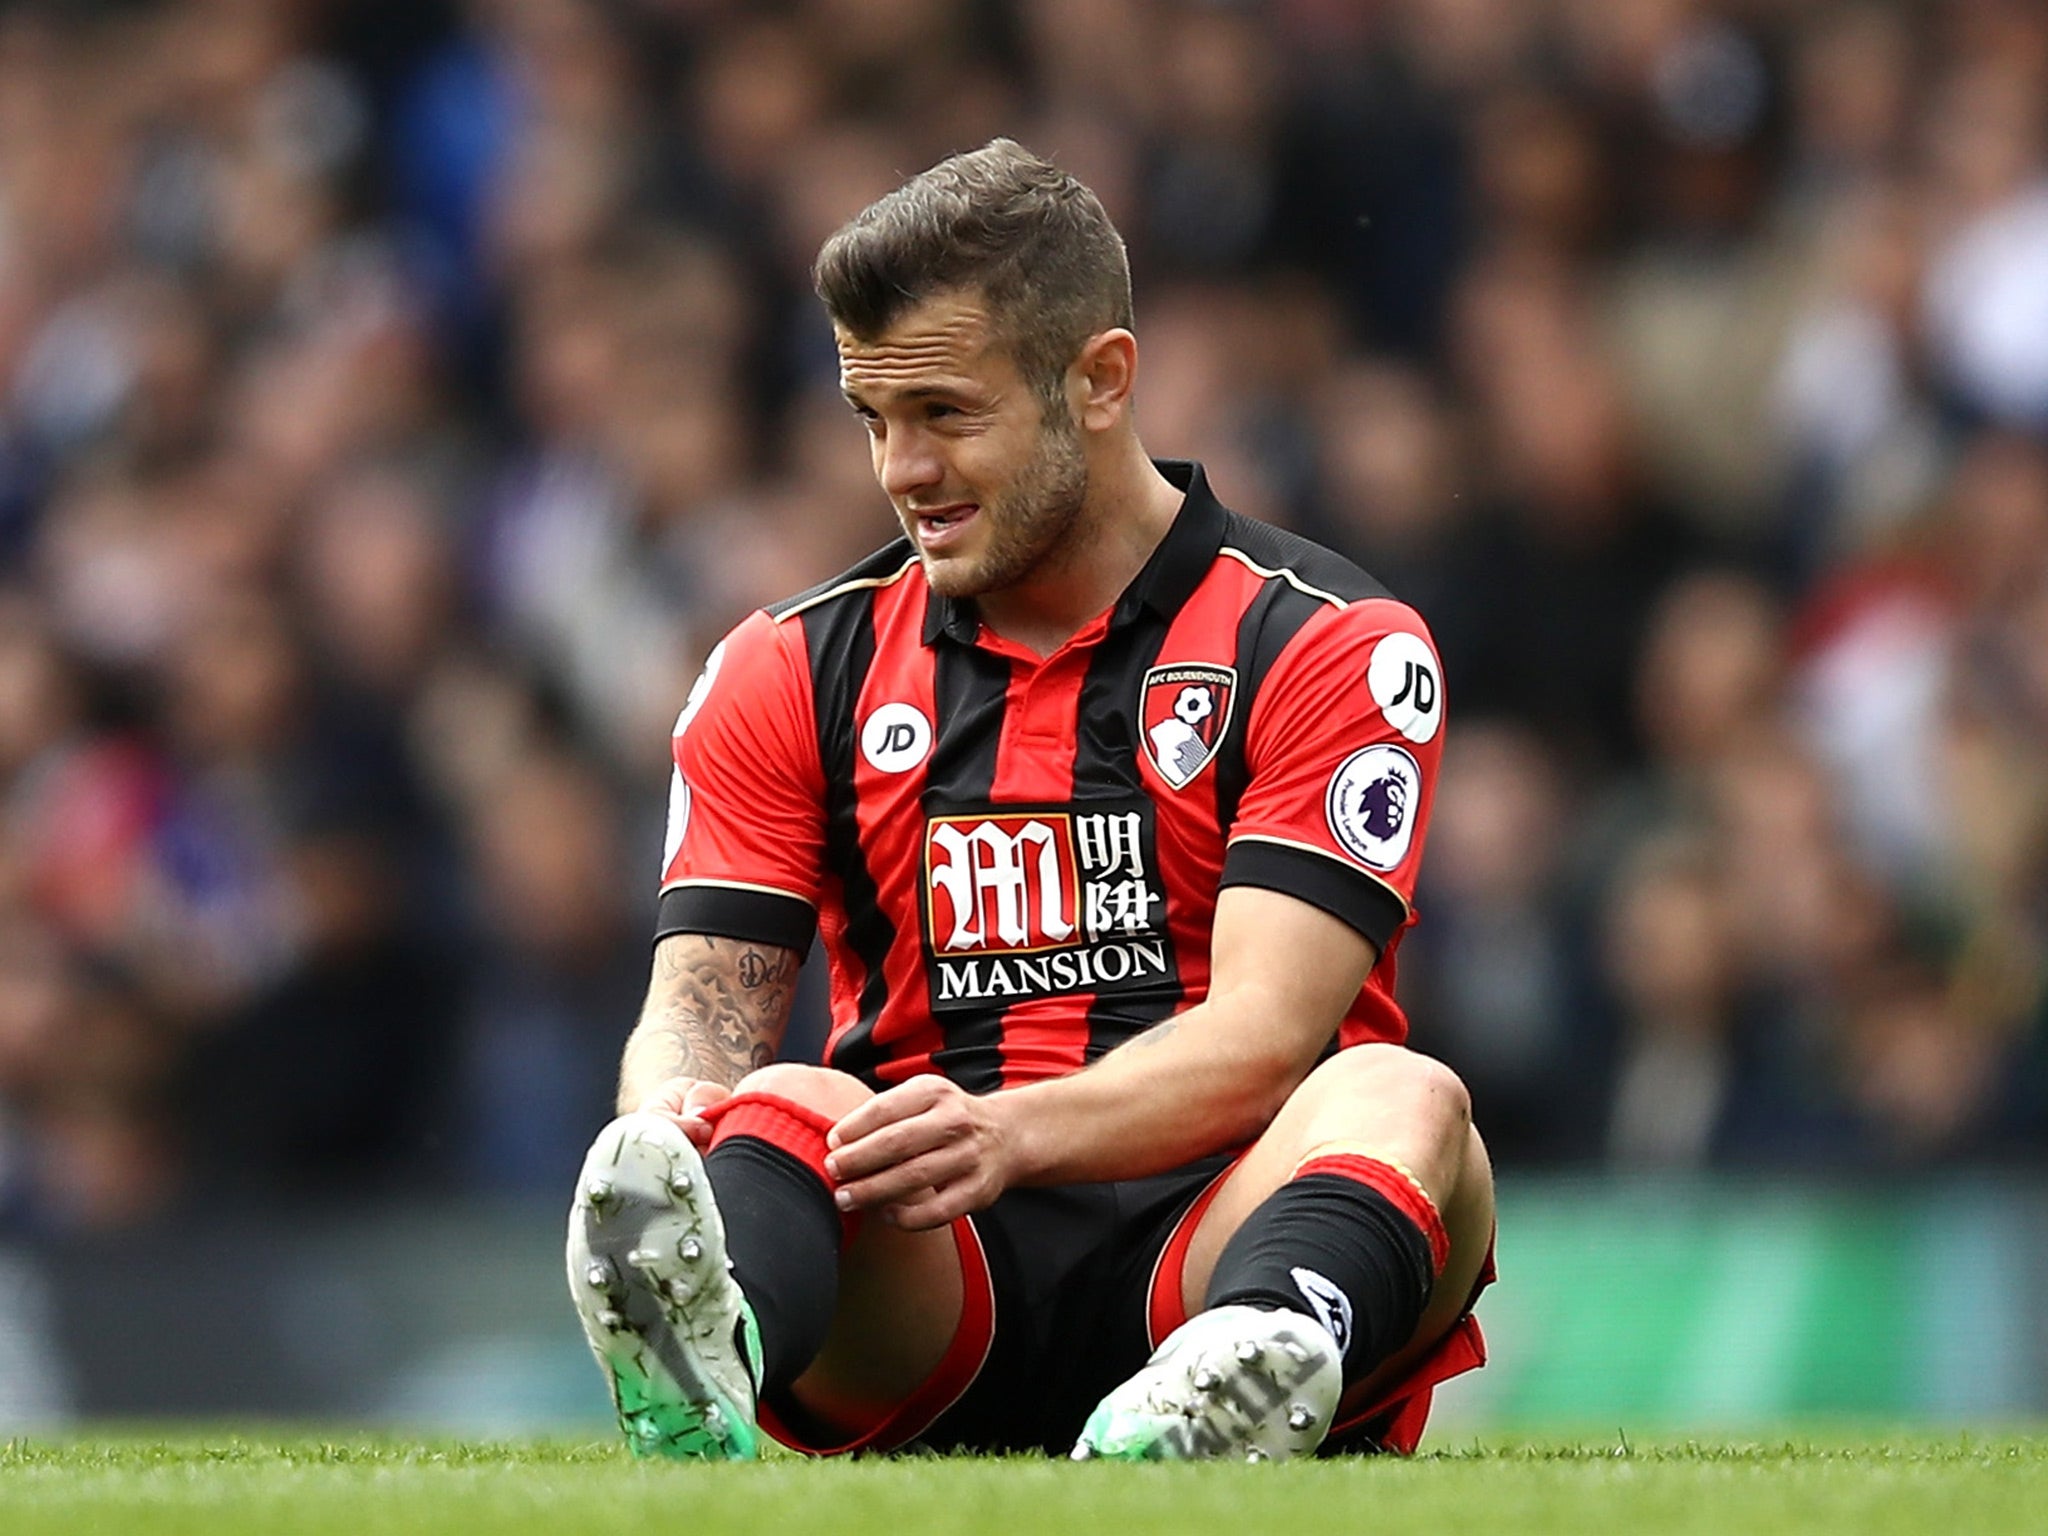 Bournemouth decided against permanently signing Jack Wilshere